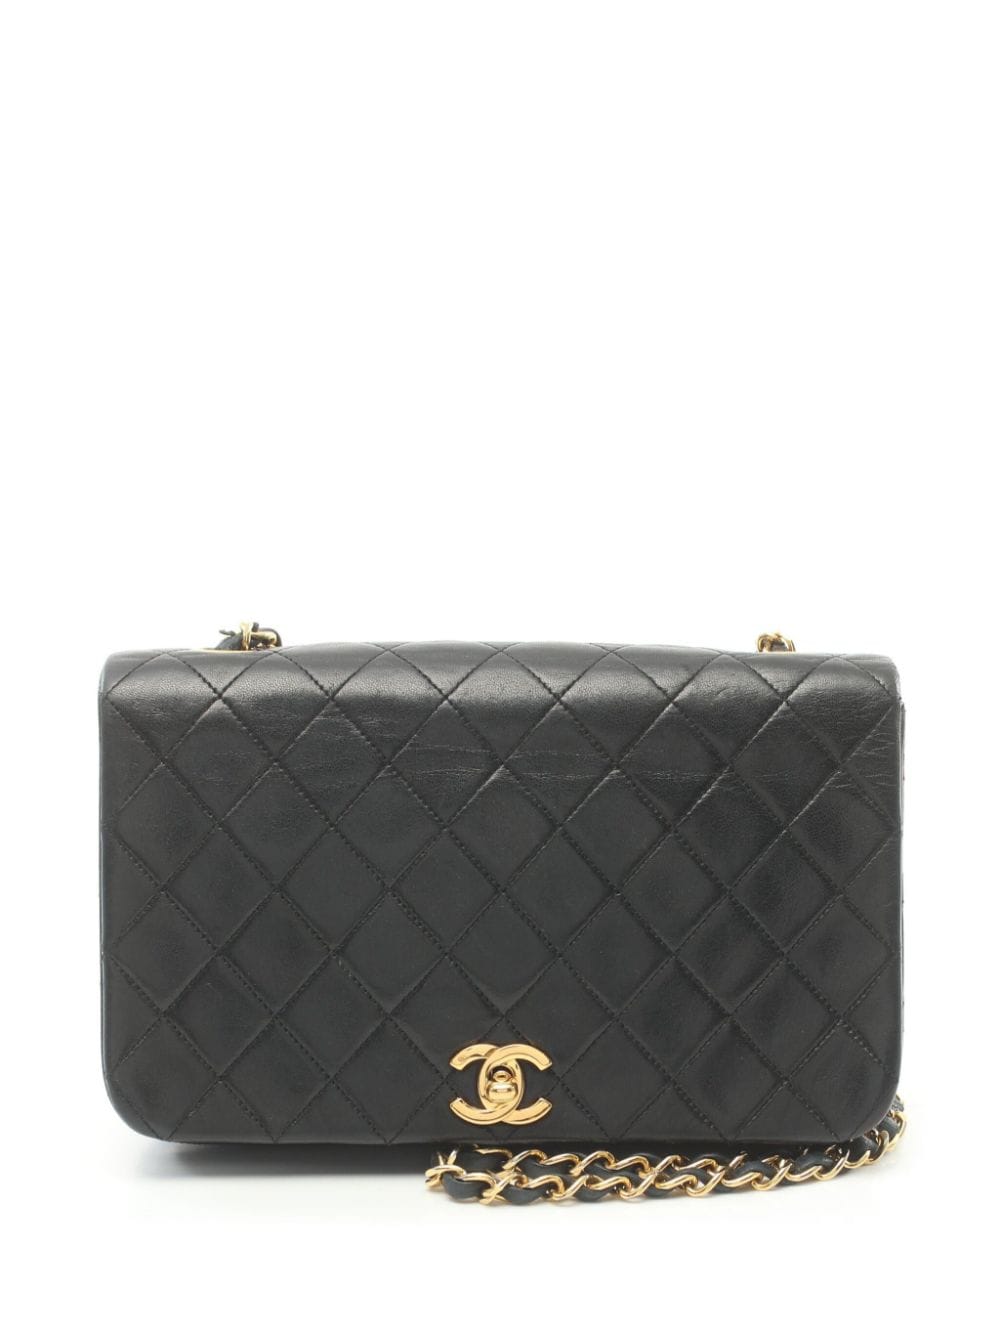 CHANEL Pre-Owned 1989-1991 diamond-quilted shoulder bag - Nero